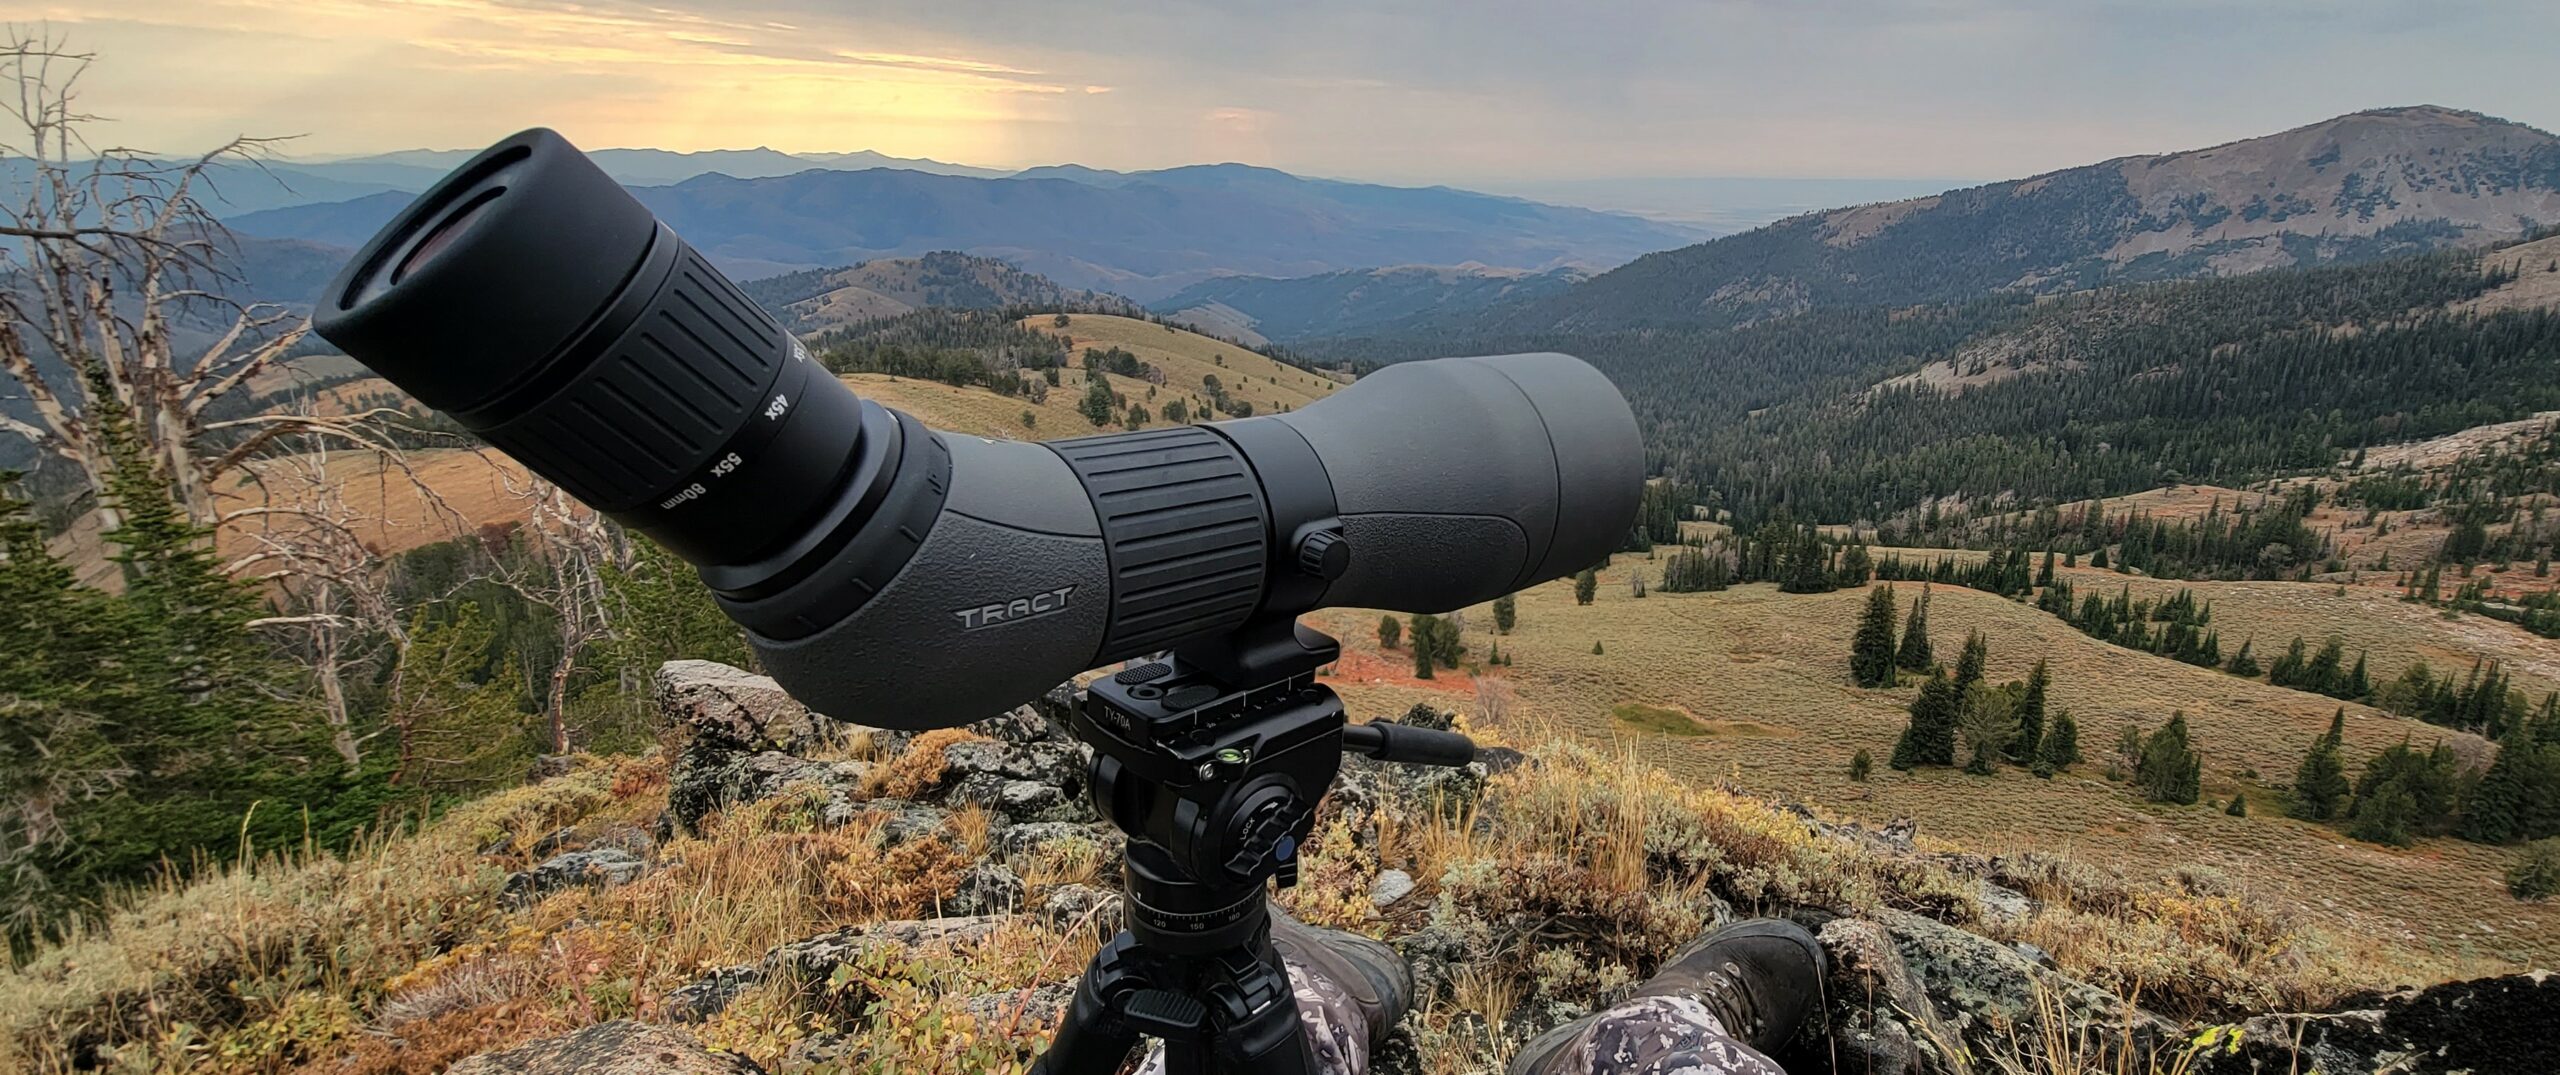 Tract Optics Review - Tract Toric 27-55x80mm Spotting Scope Review